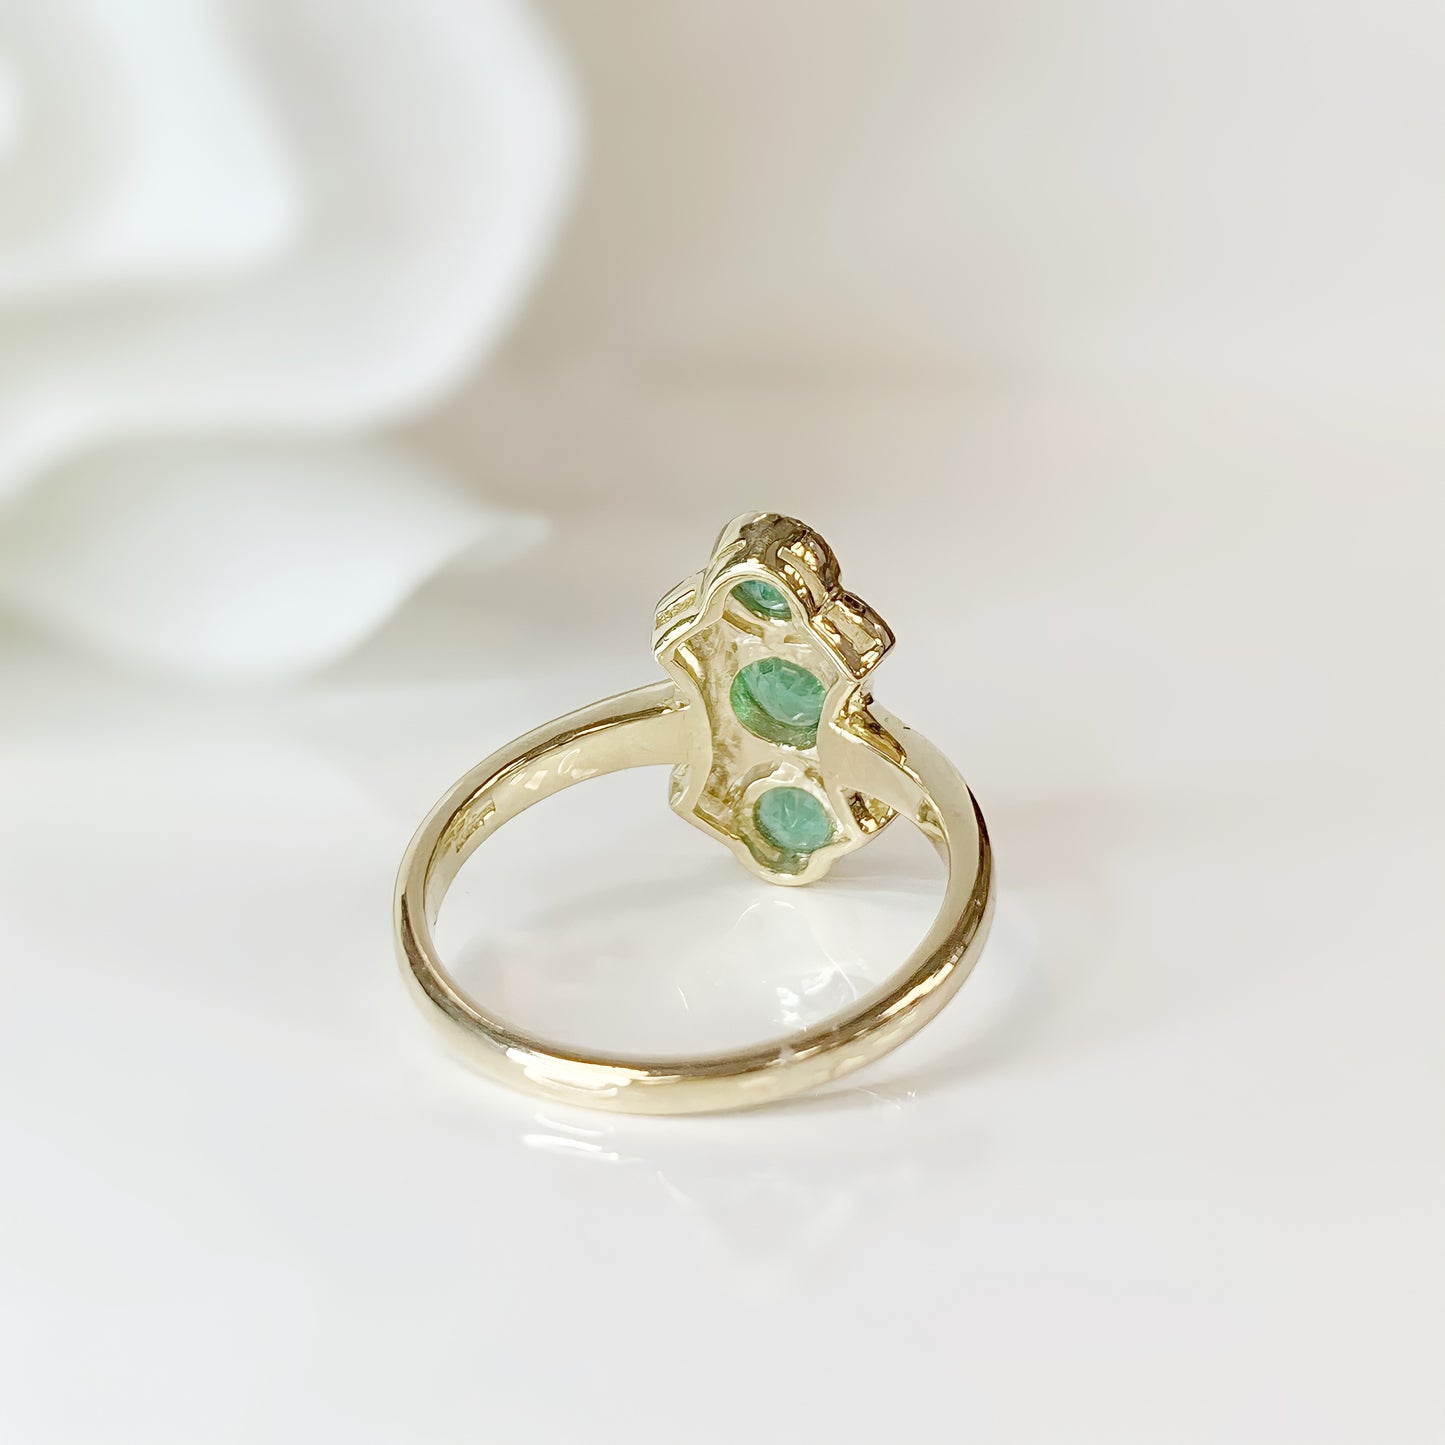 9ct Yellow Gold Emerald and Diamond Art Deco Inspired Ring – Size L 1/2